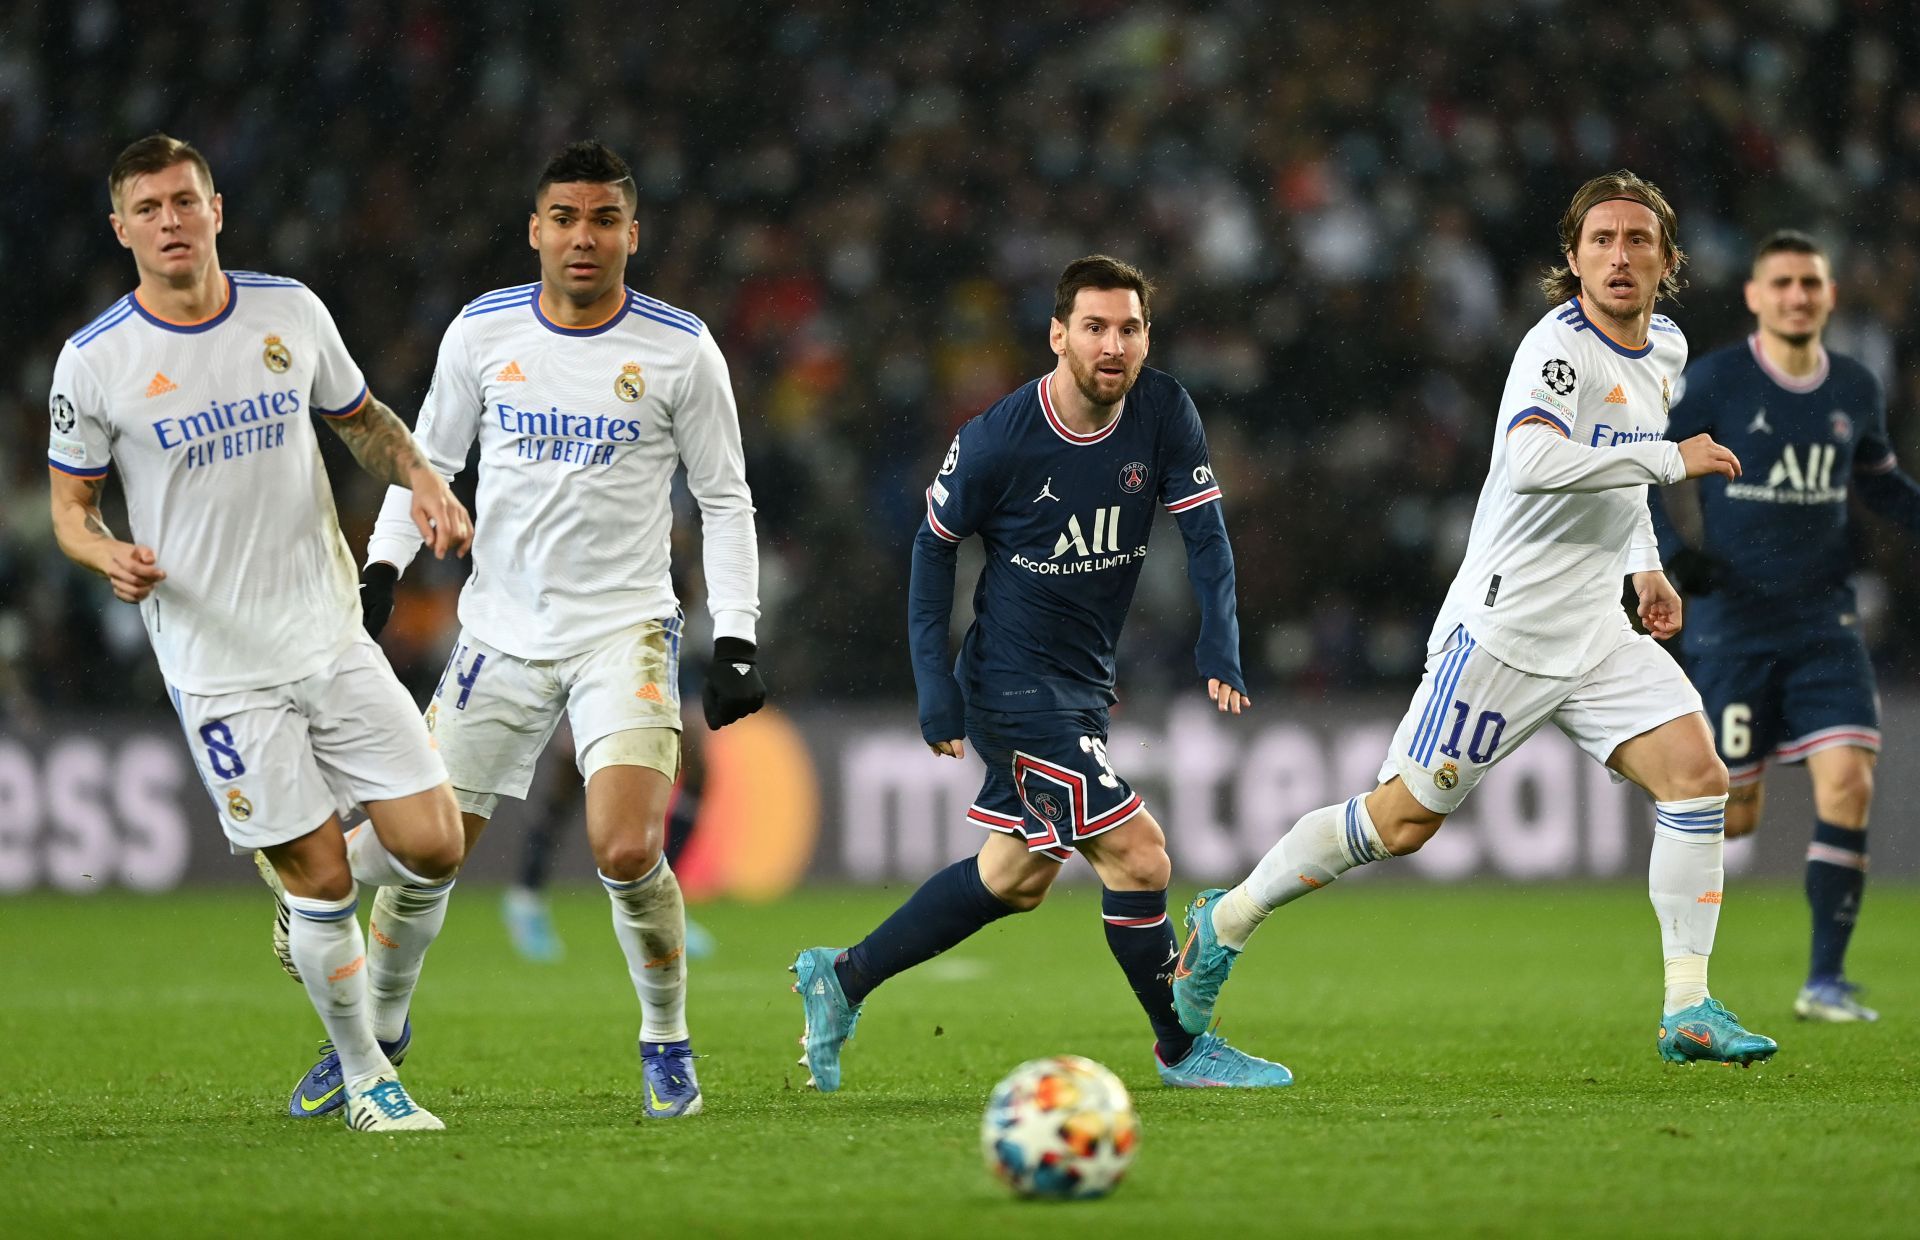 Lionel Messi missed a penalty in the first-leg fixture against Real Madrid